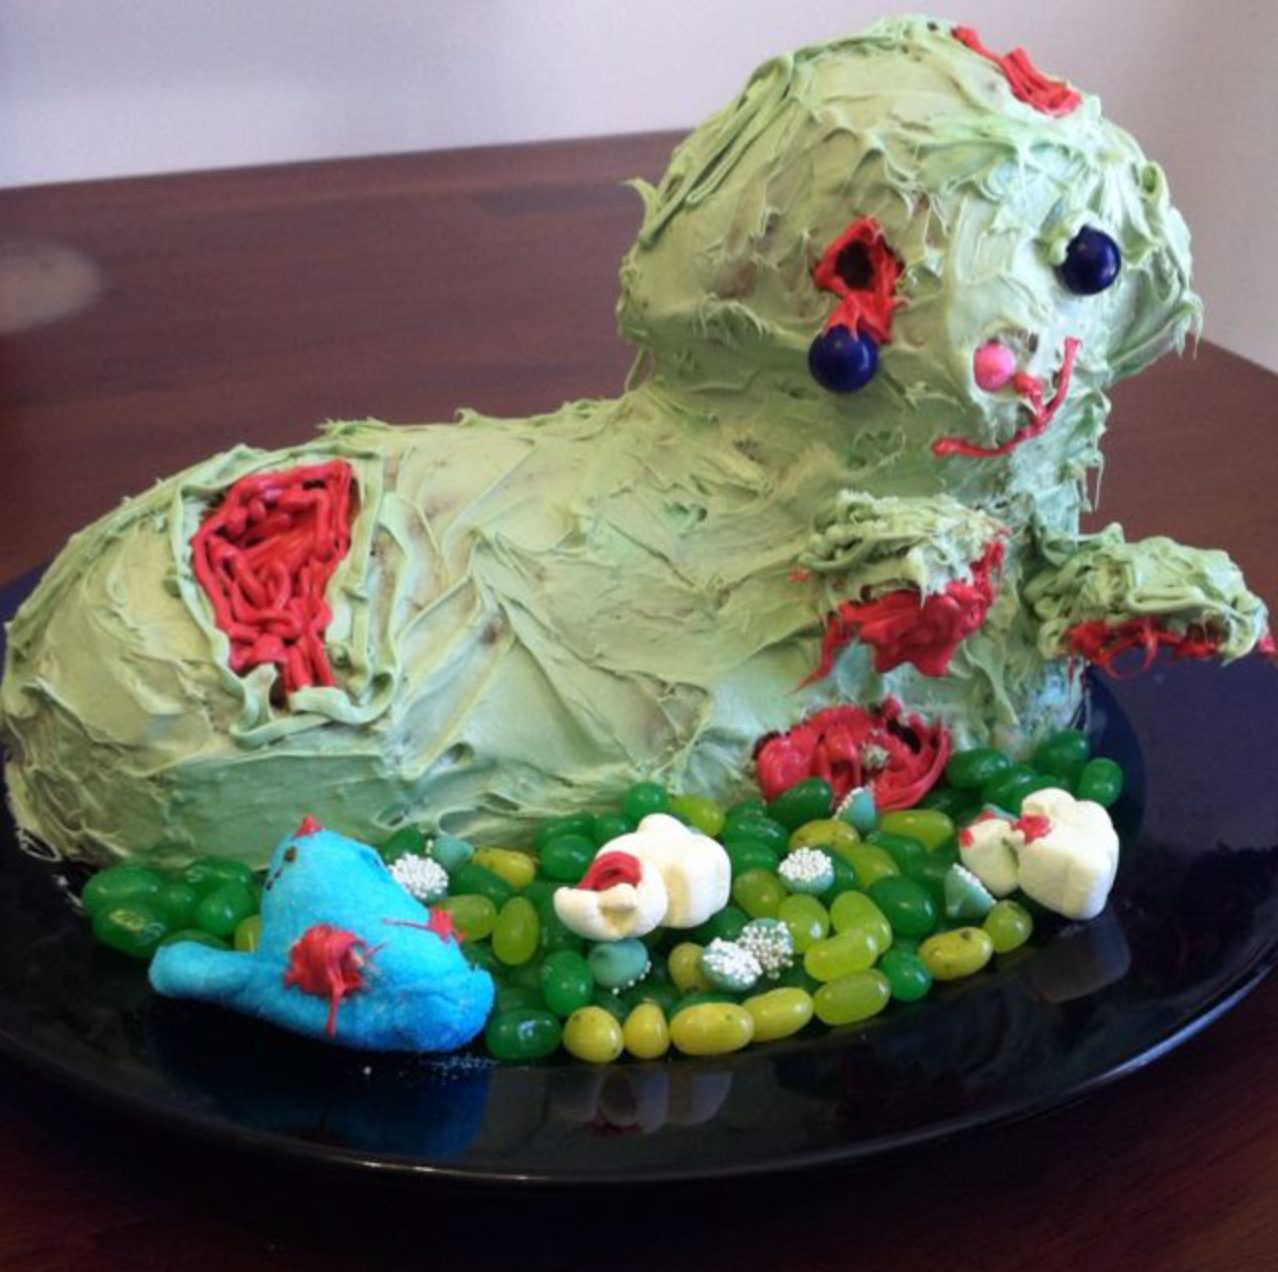 zombie themed easter lamb cake with green icing and bite marks, perfect for easter-ween, spooky easter, halloween easter, easterween holiday.